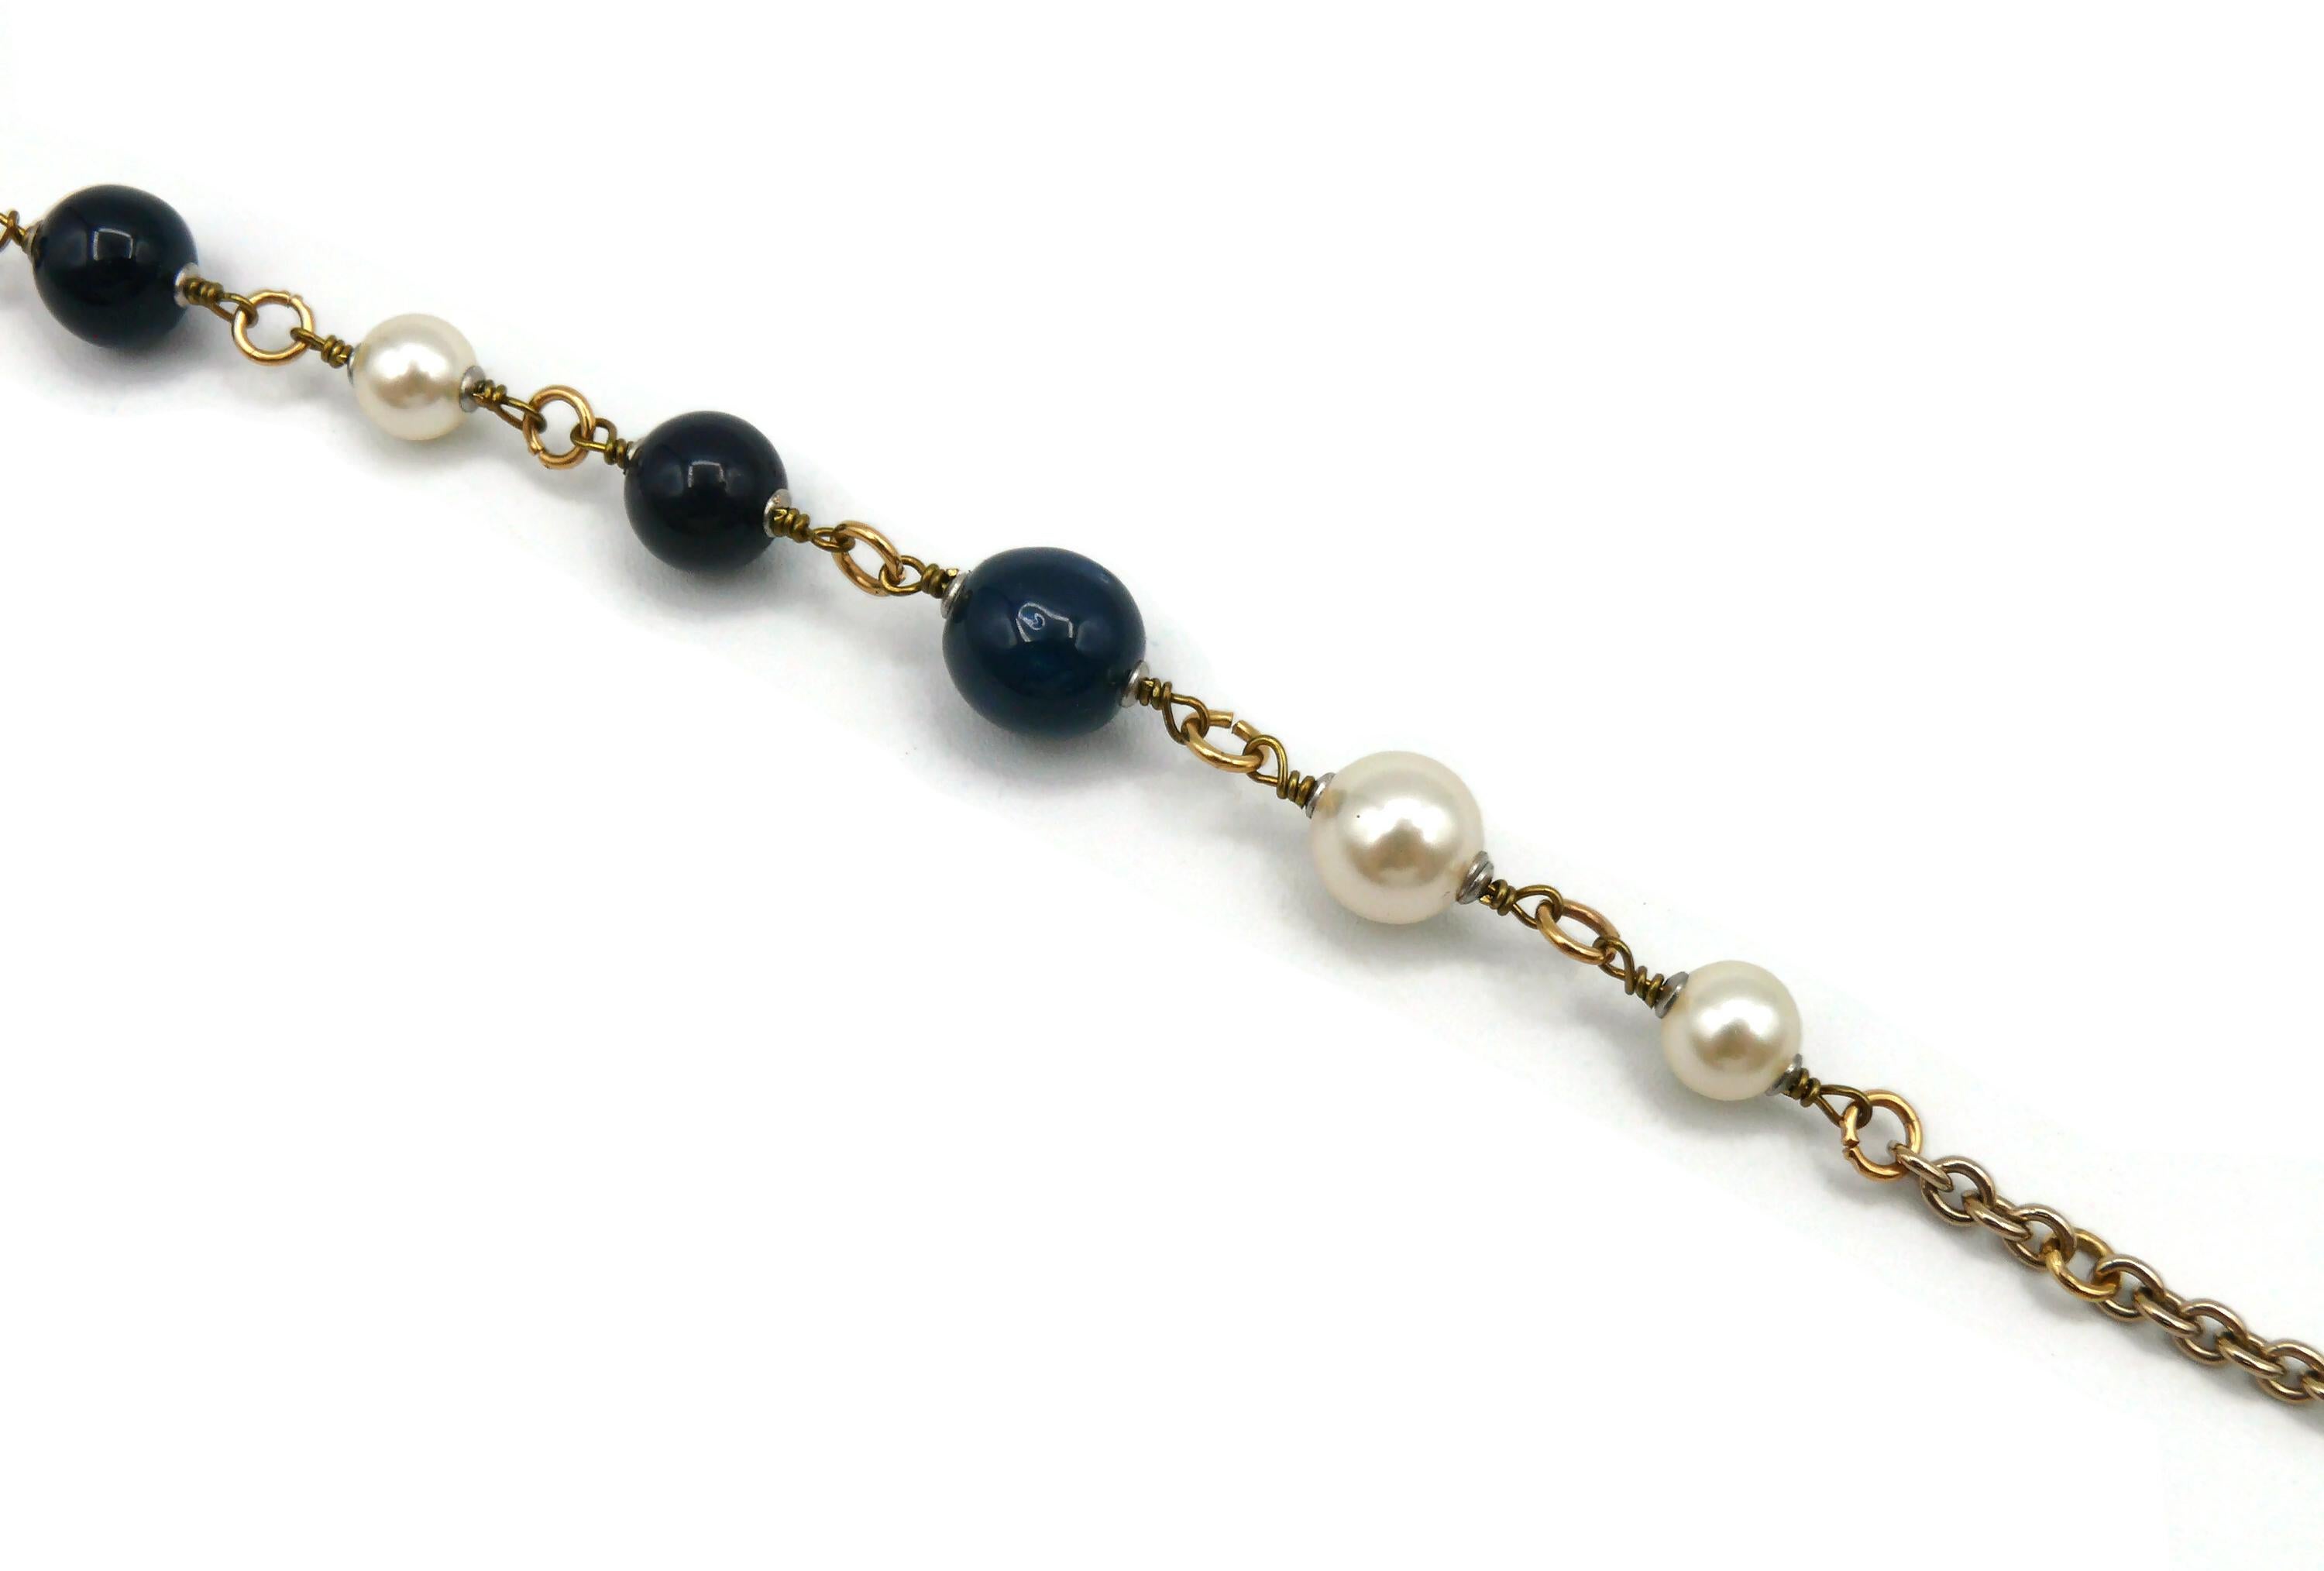 CHANEL CC Logos Faux Pearls, Black & Blue Resin Beads Necklace, 2016 4